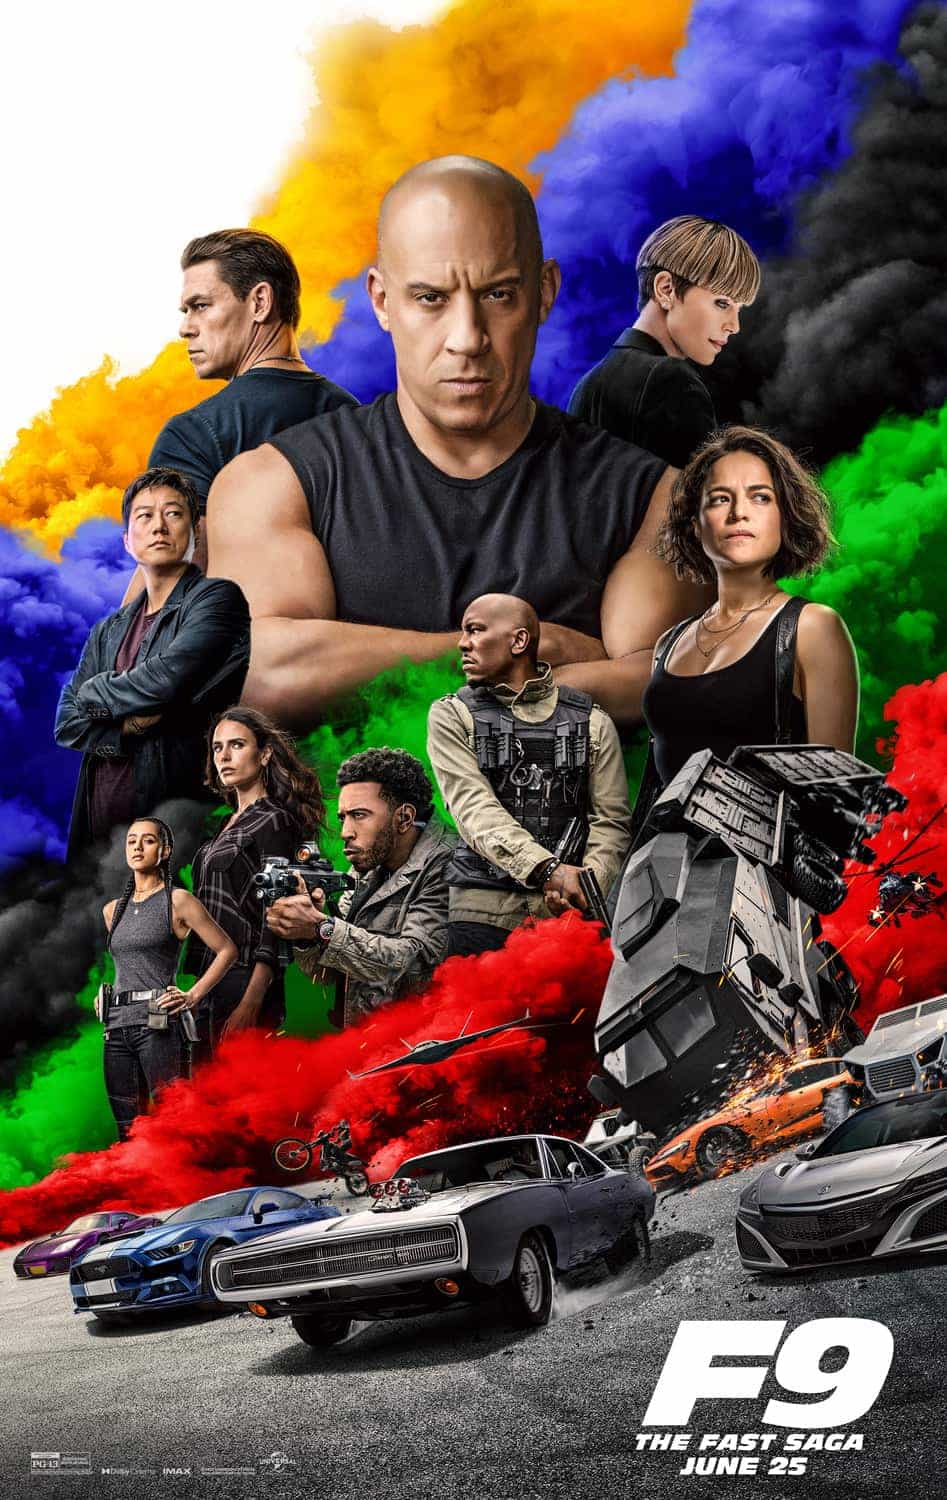 US Box Office Weekend Report 2nd July - 4th July 2021:  Fast 9 stays at the top with Boss Baby 2 the top new movie at number 2